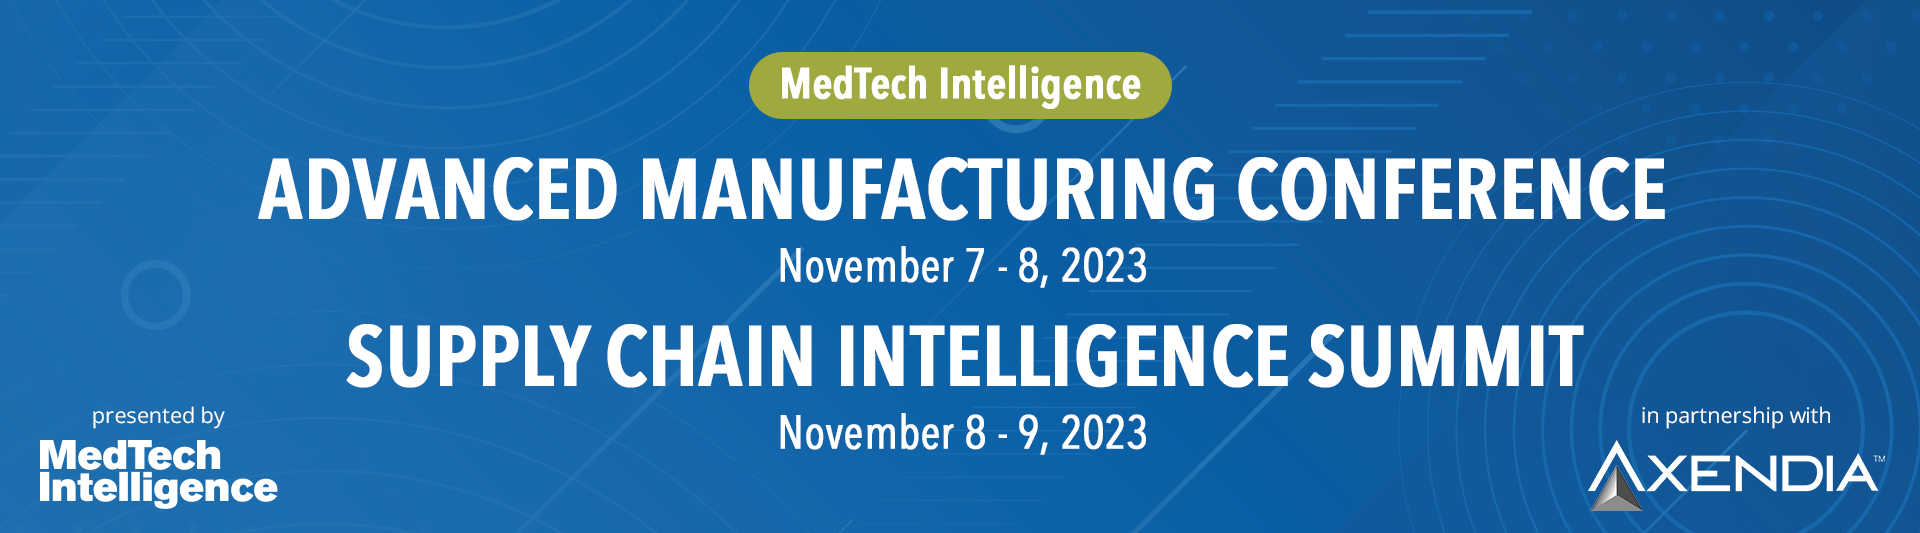 MedTech Intelligence Advanced Manufacturing and Supply Chain Intelligence Summit